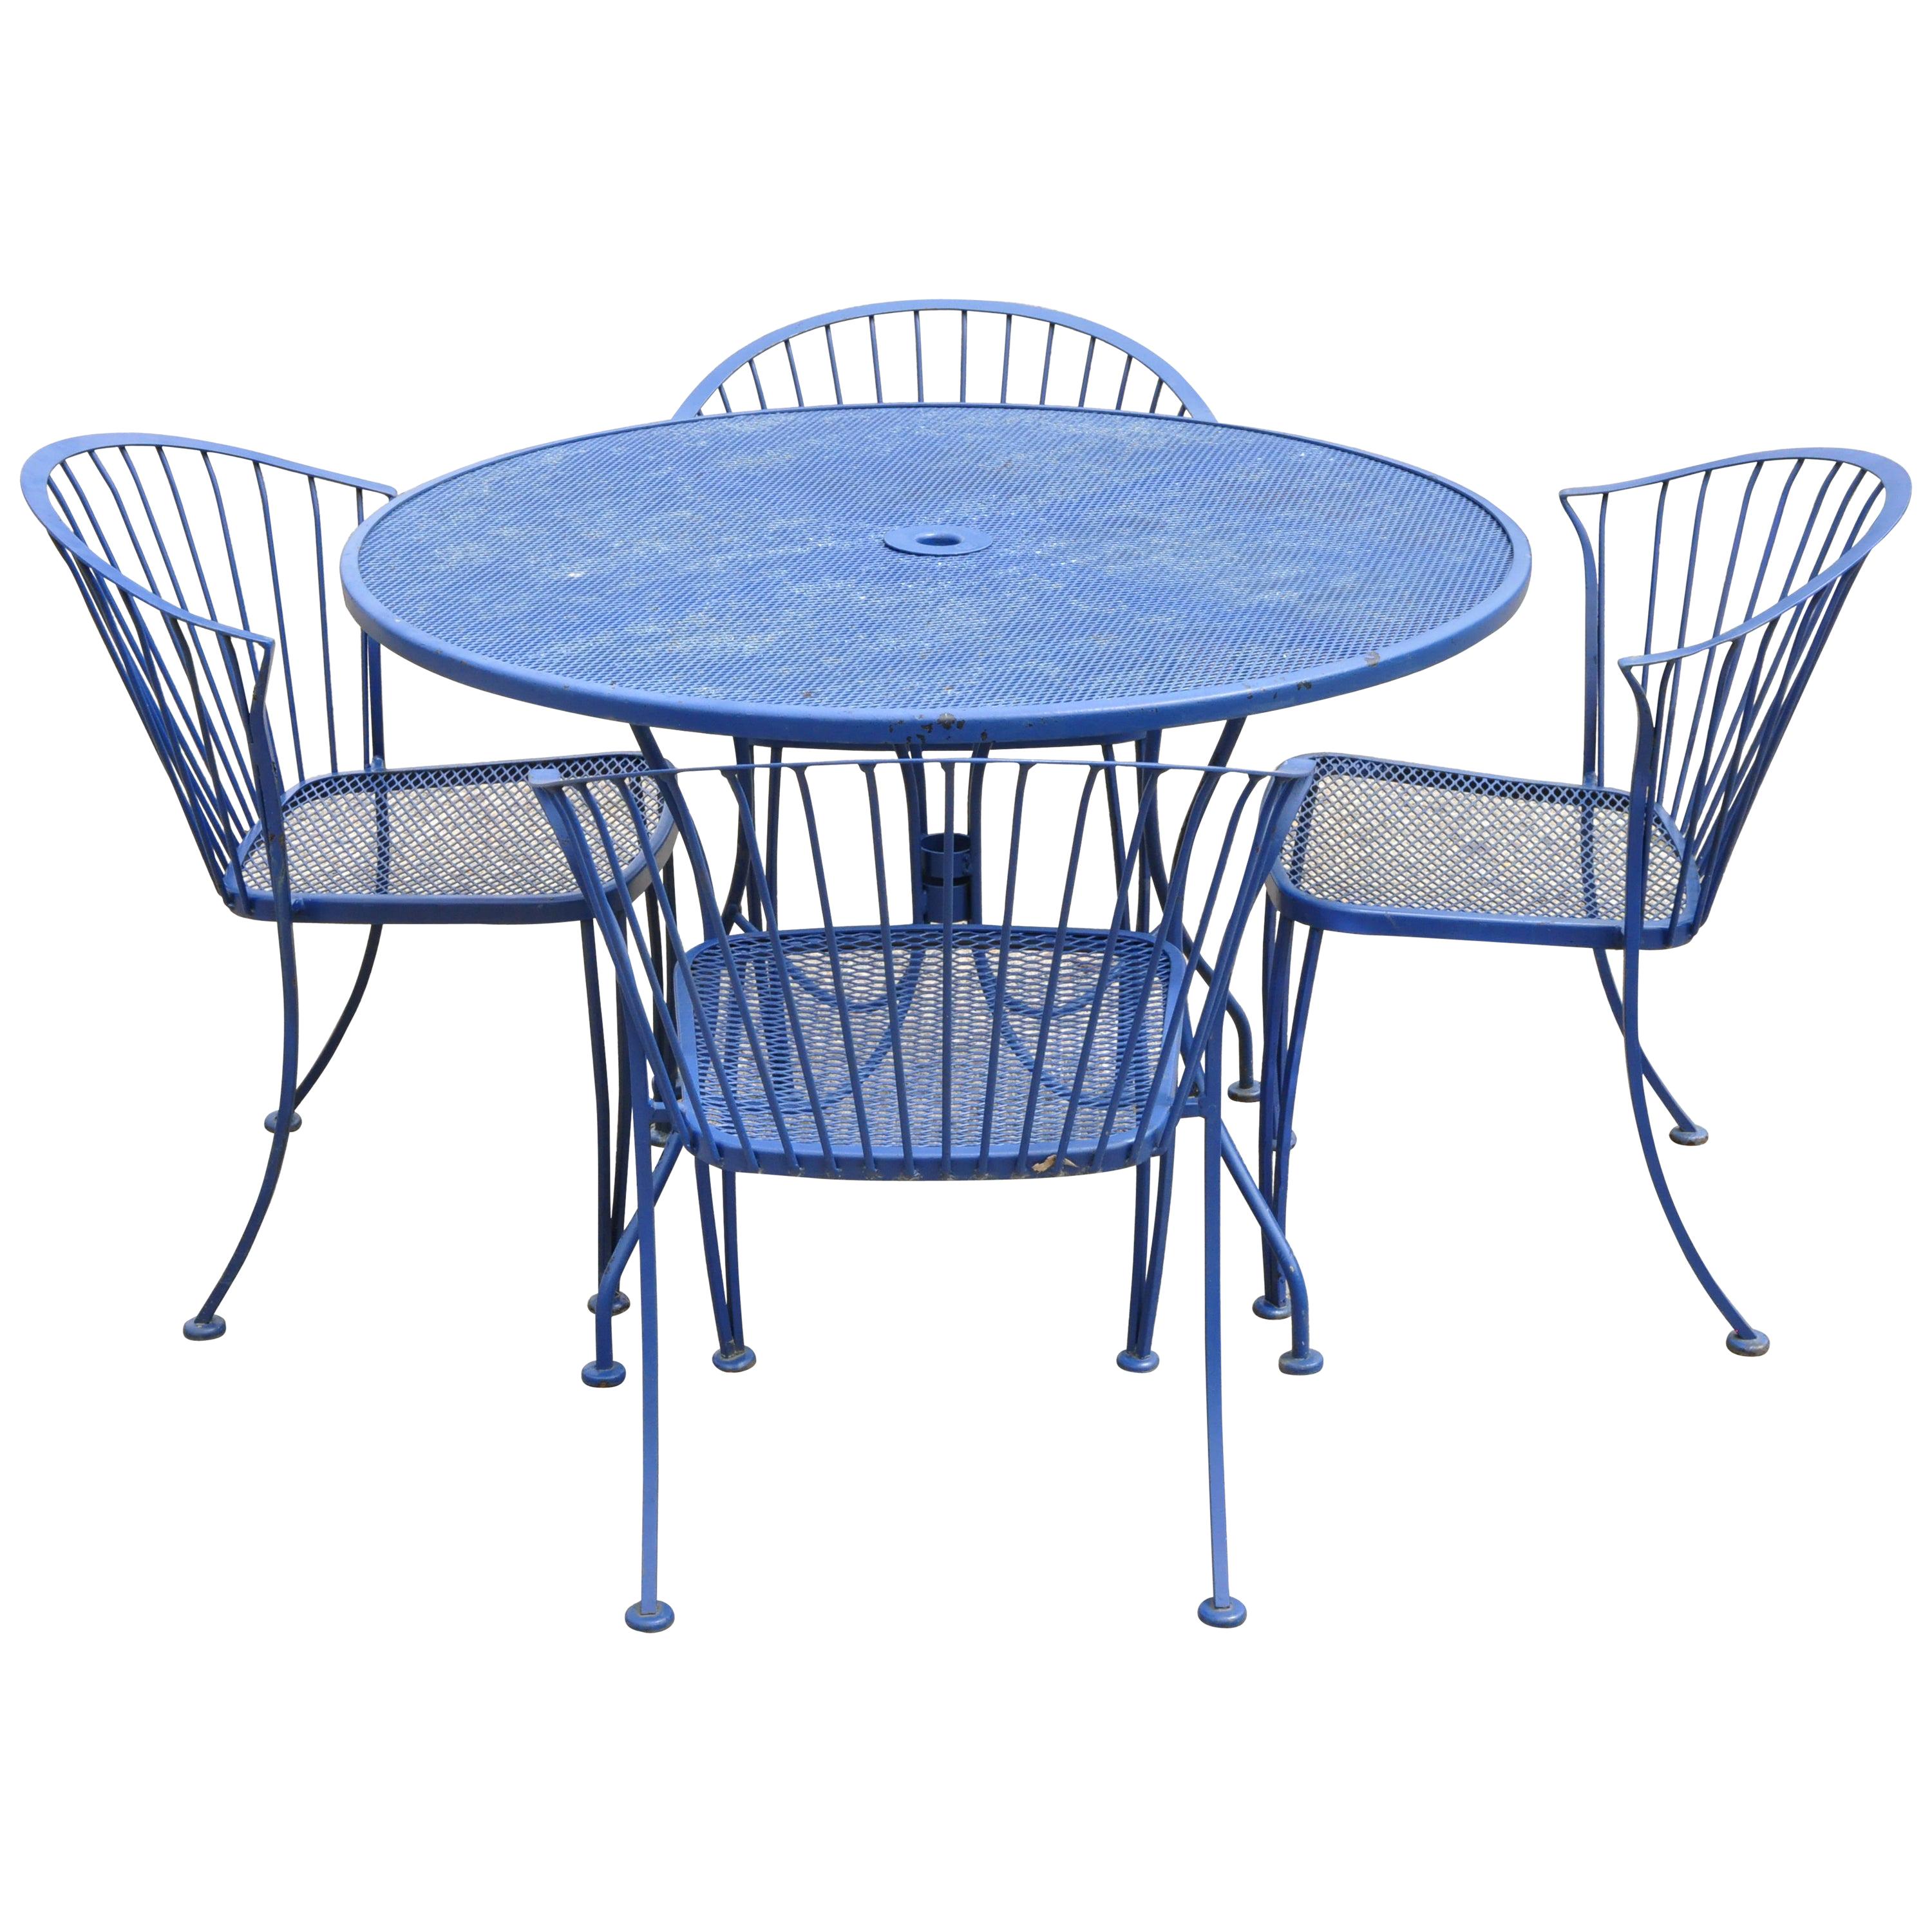 Woodard Pinecrest Blue Wrought Iron 5pc Patio Garden Dining 4 Chairs Round Table